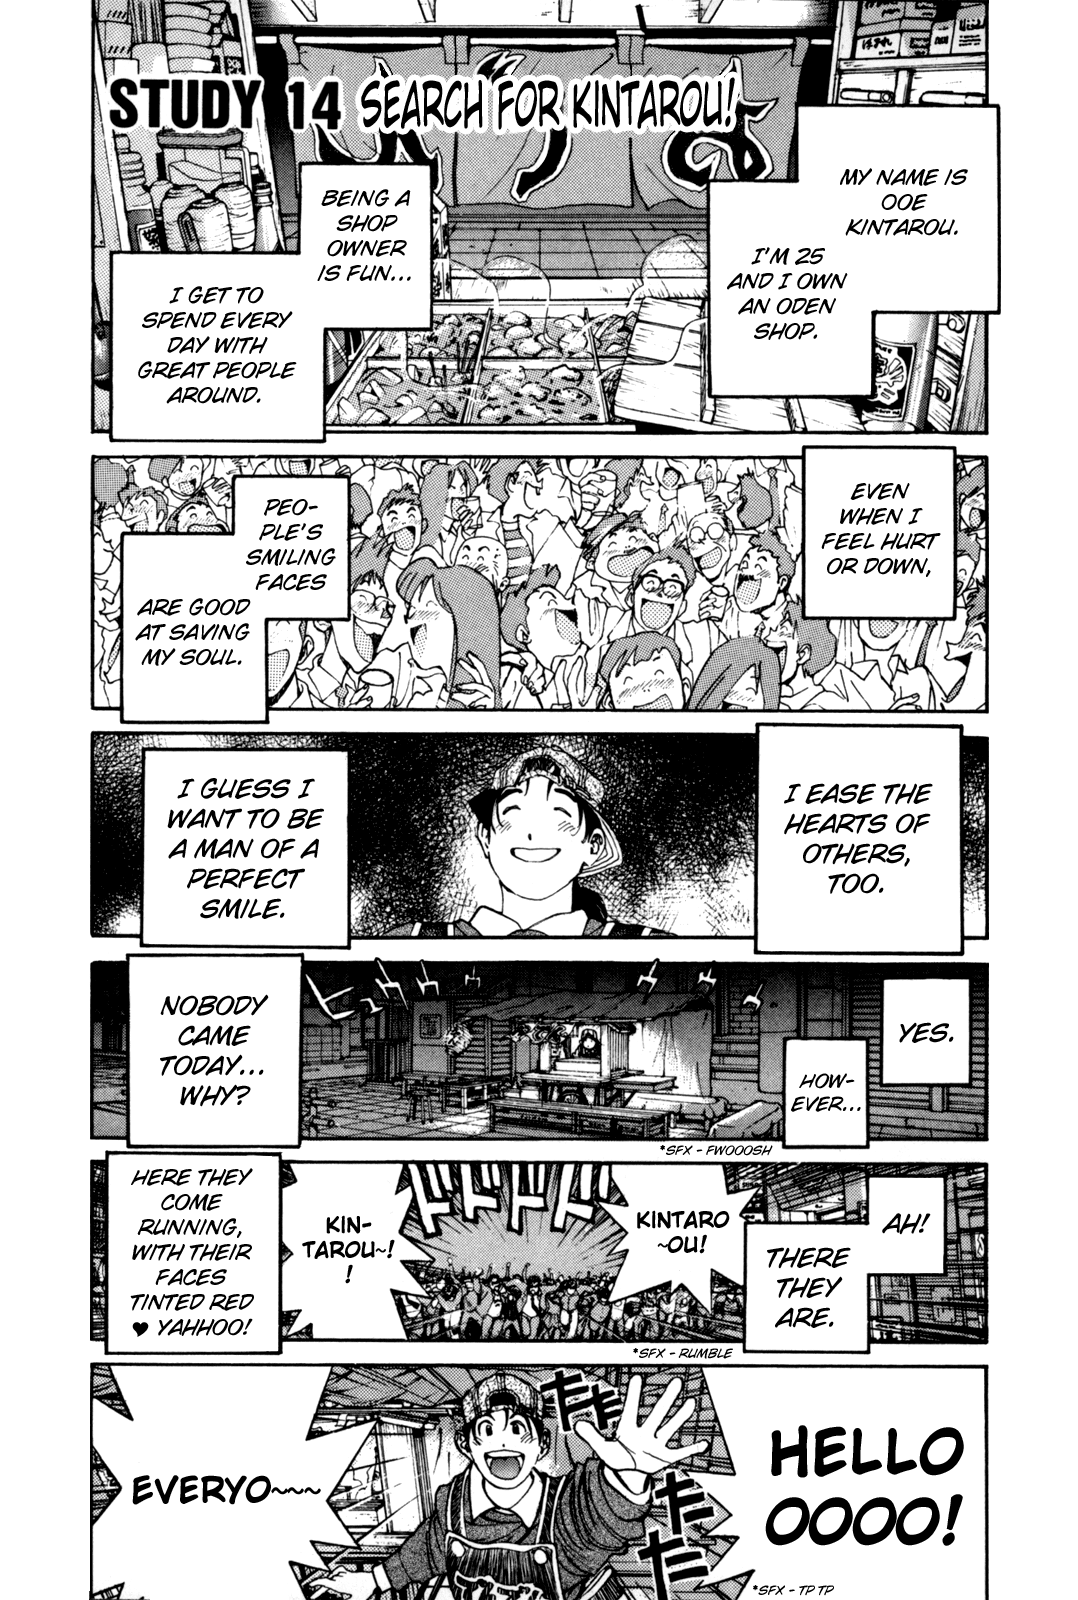 Golden Boy Vol.3 Chapter 14: Looking For Kintaro! - Picture 1